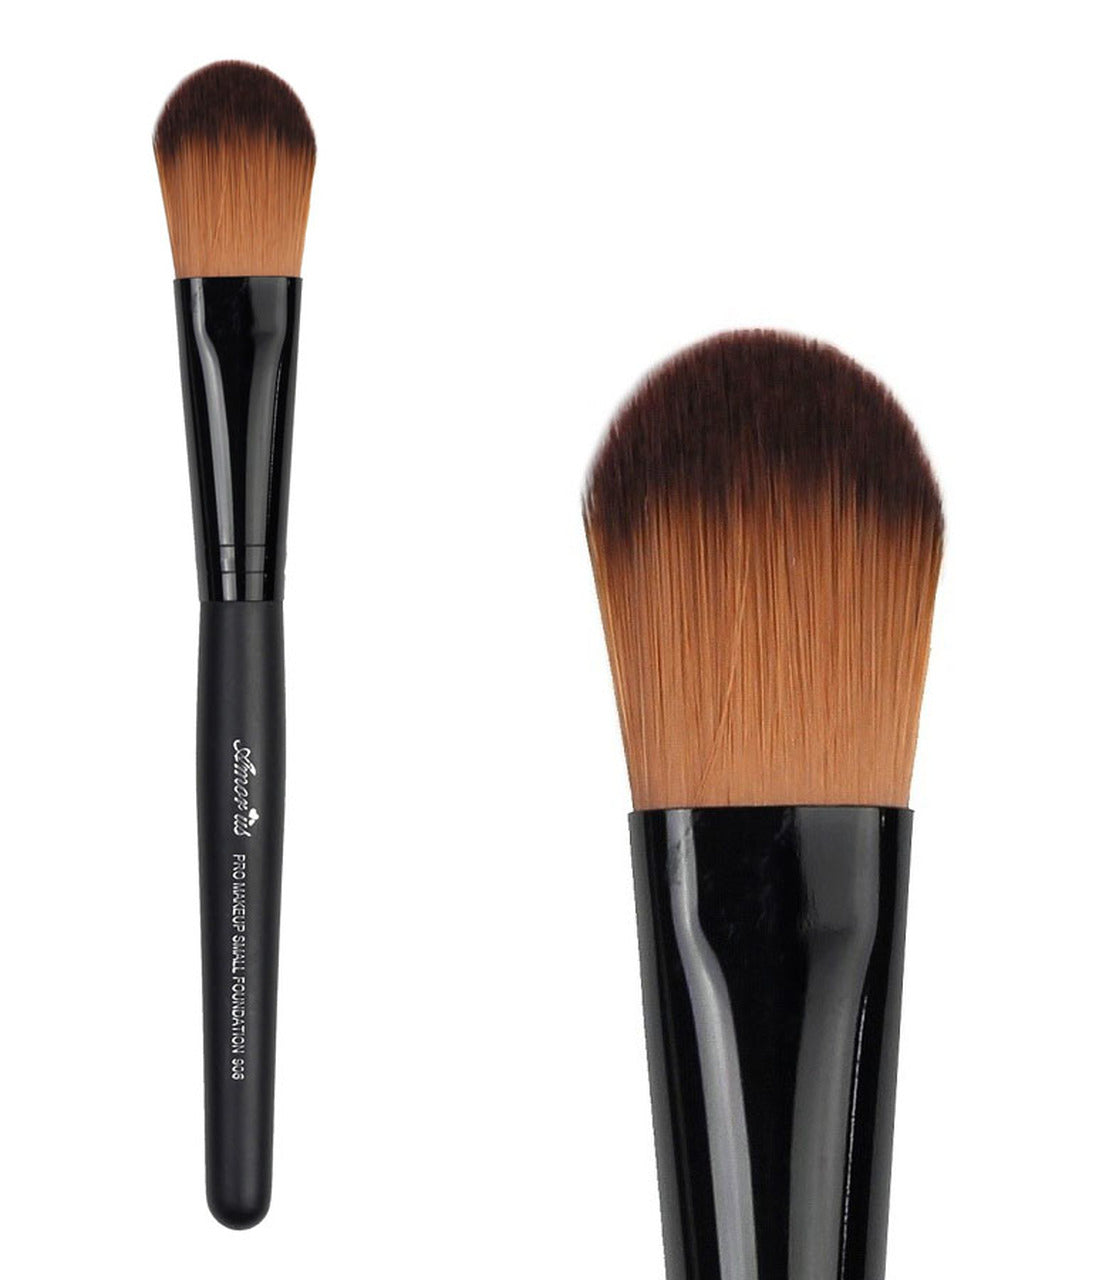 AM-BR906 : Professional Deluxe Foundation Brush 1 DZ